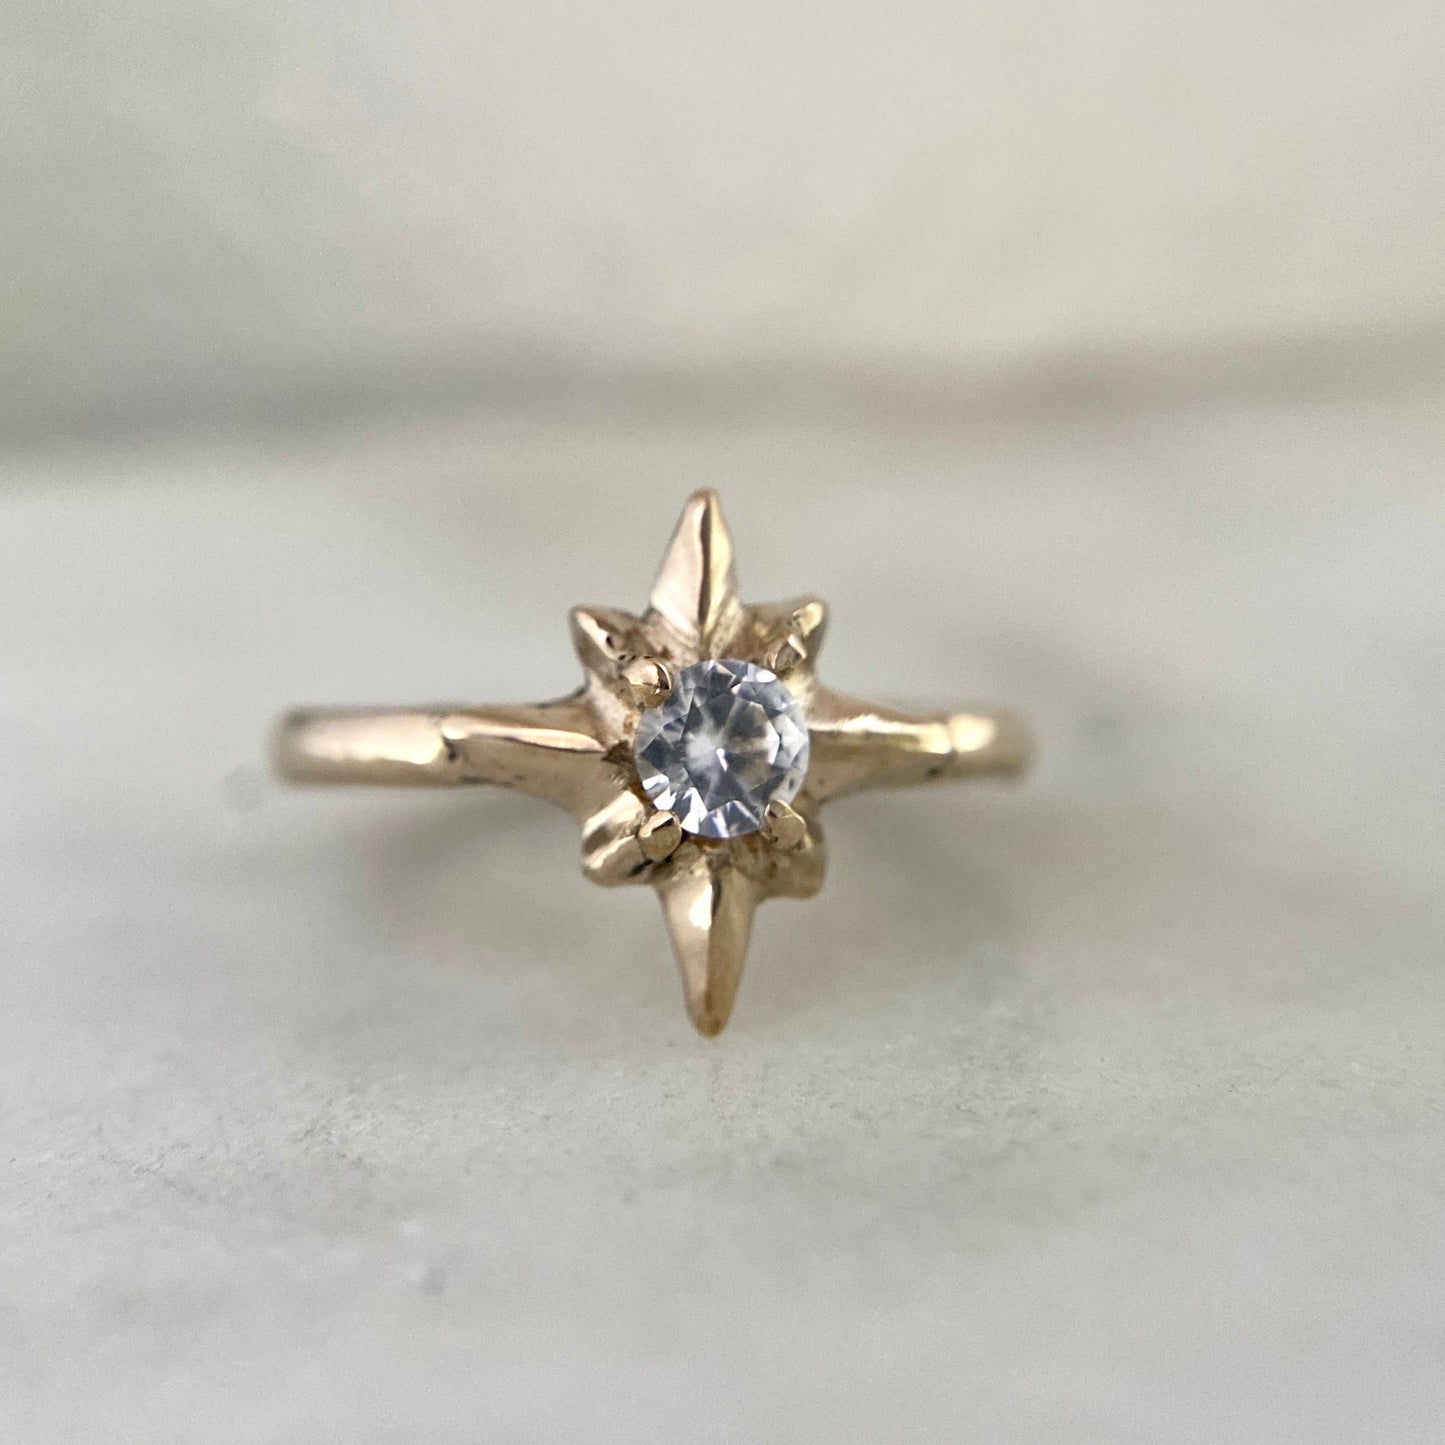 Polaris North Star Ring cast in gold tone bronze set with a clear Cubic Zirconia, by Iron Oxide Designs